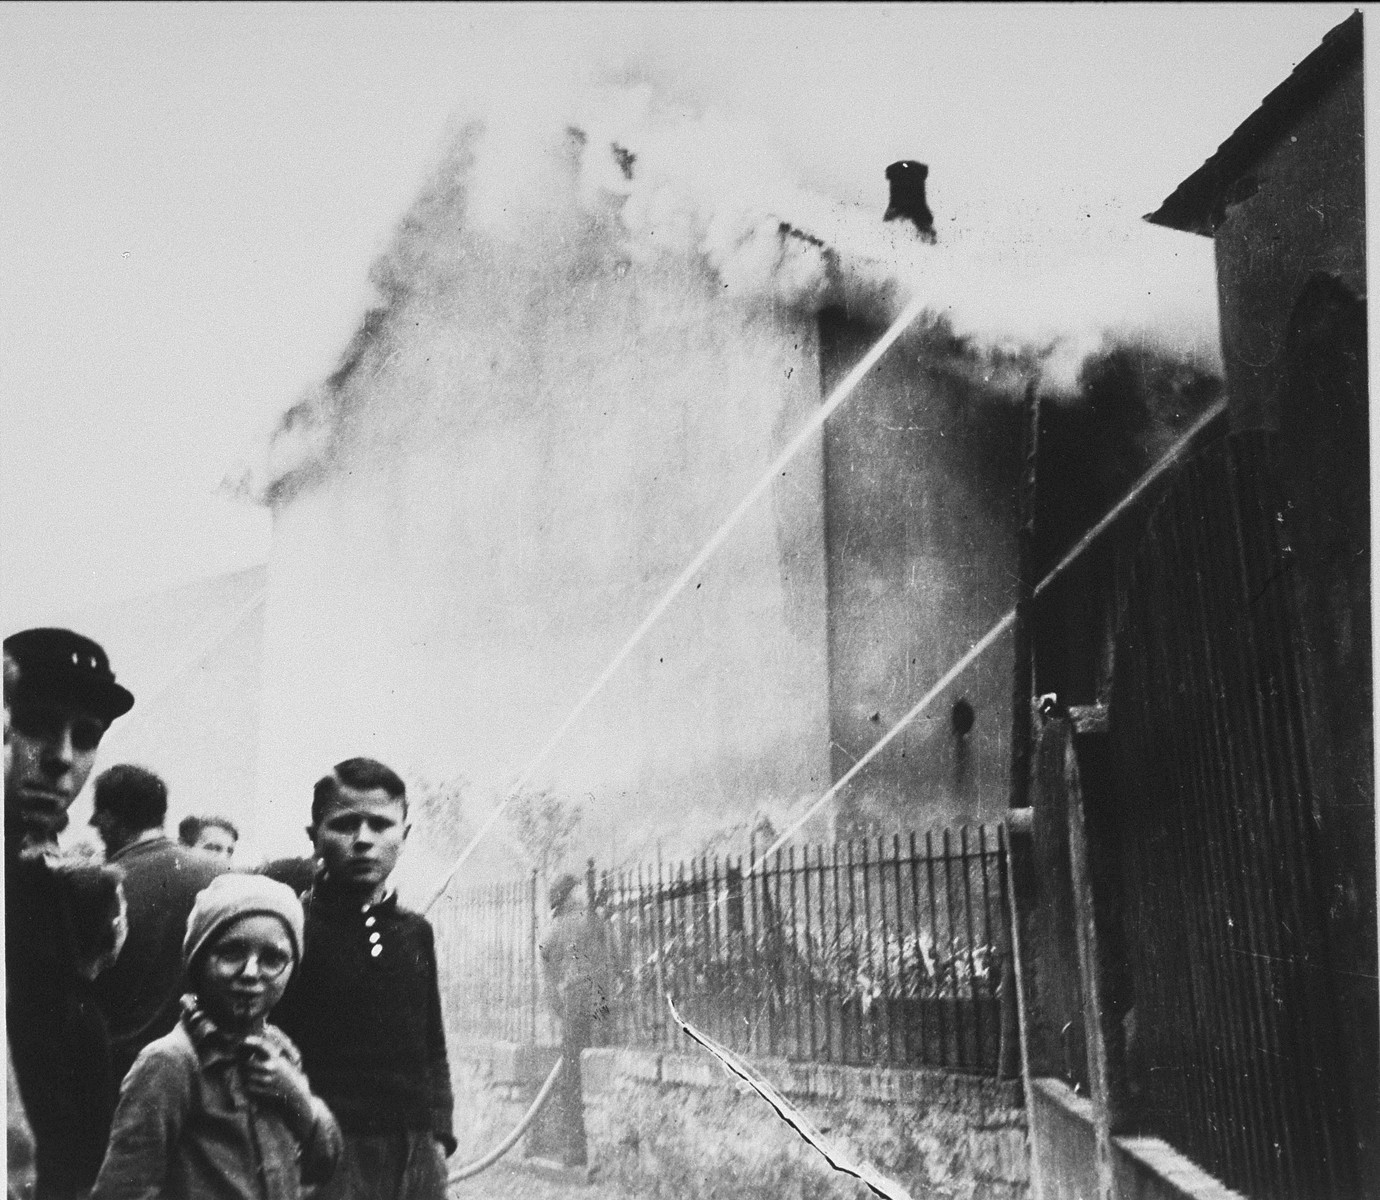 On the morning after Kristallnacht local residents watch as the Ober Ramstadt synagogue is destroyed by fire.   

The local fire department prevented the fire from spreading to a nearby home, but did not try to limit the damage to the synagogue.

The youth who took the series of photographs of the burning synagogue in Ober-Ramstadt, Georg Schmidt,  came from a family that opposed the Nazis.  The film was confiscated by police from Schmidt's home the same day the photos were taken, and developed immediately.  The prints and negatives were stored in the city hall until a policeman in the service of the American occupation found them and removed them.  The son-in-law of the policeman found them in a toolbox and donated them to the city archive.